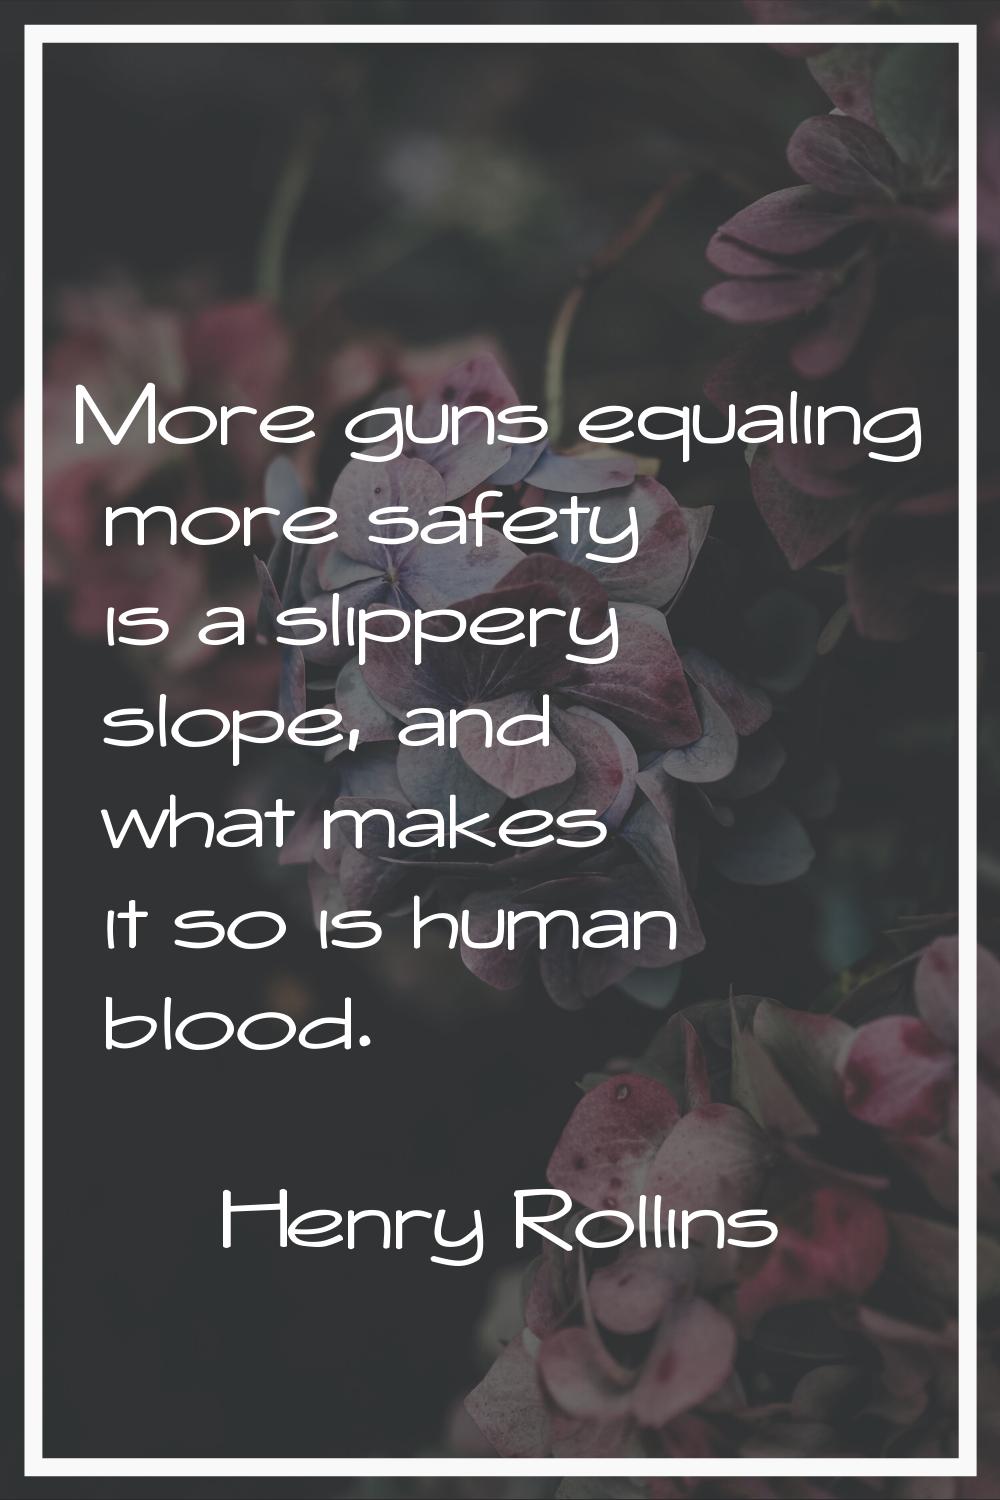 More guns equaling more safety is a slippery slope, and what makes it so is human blood.